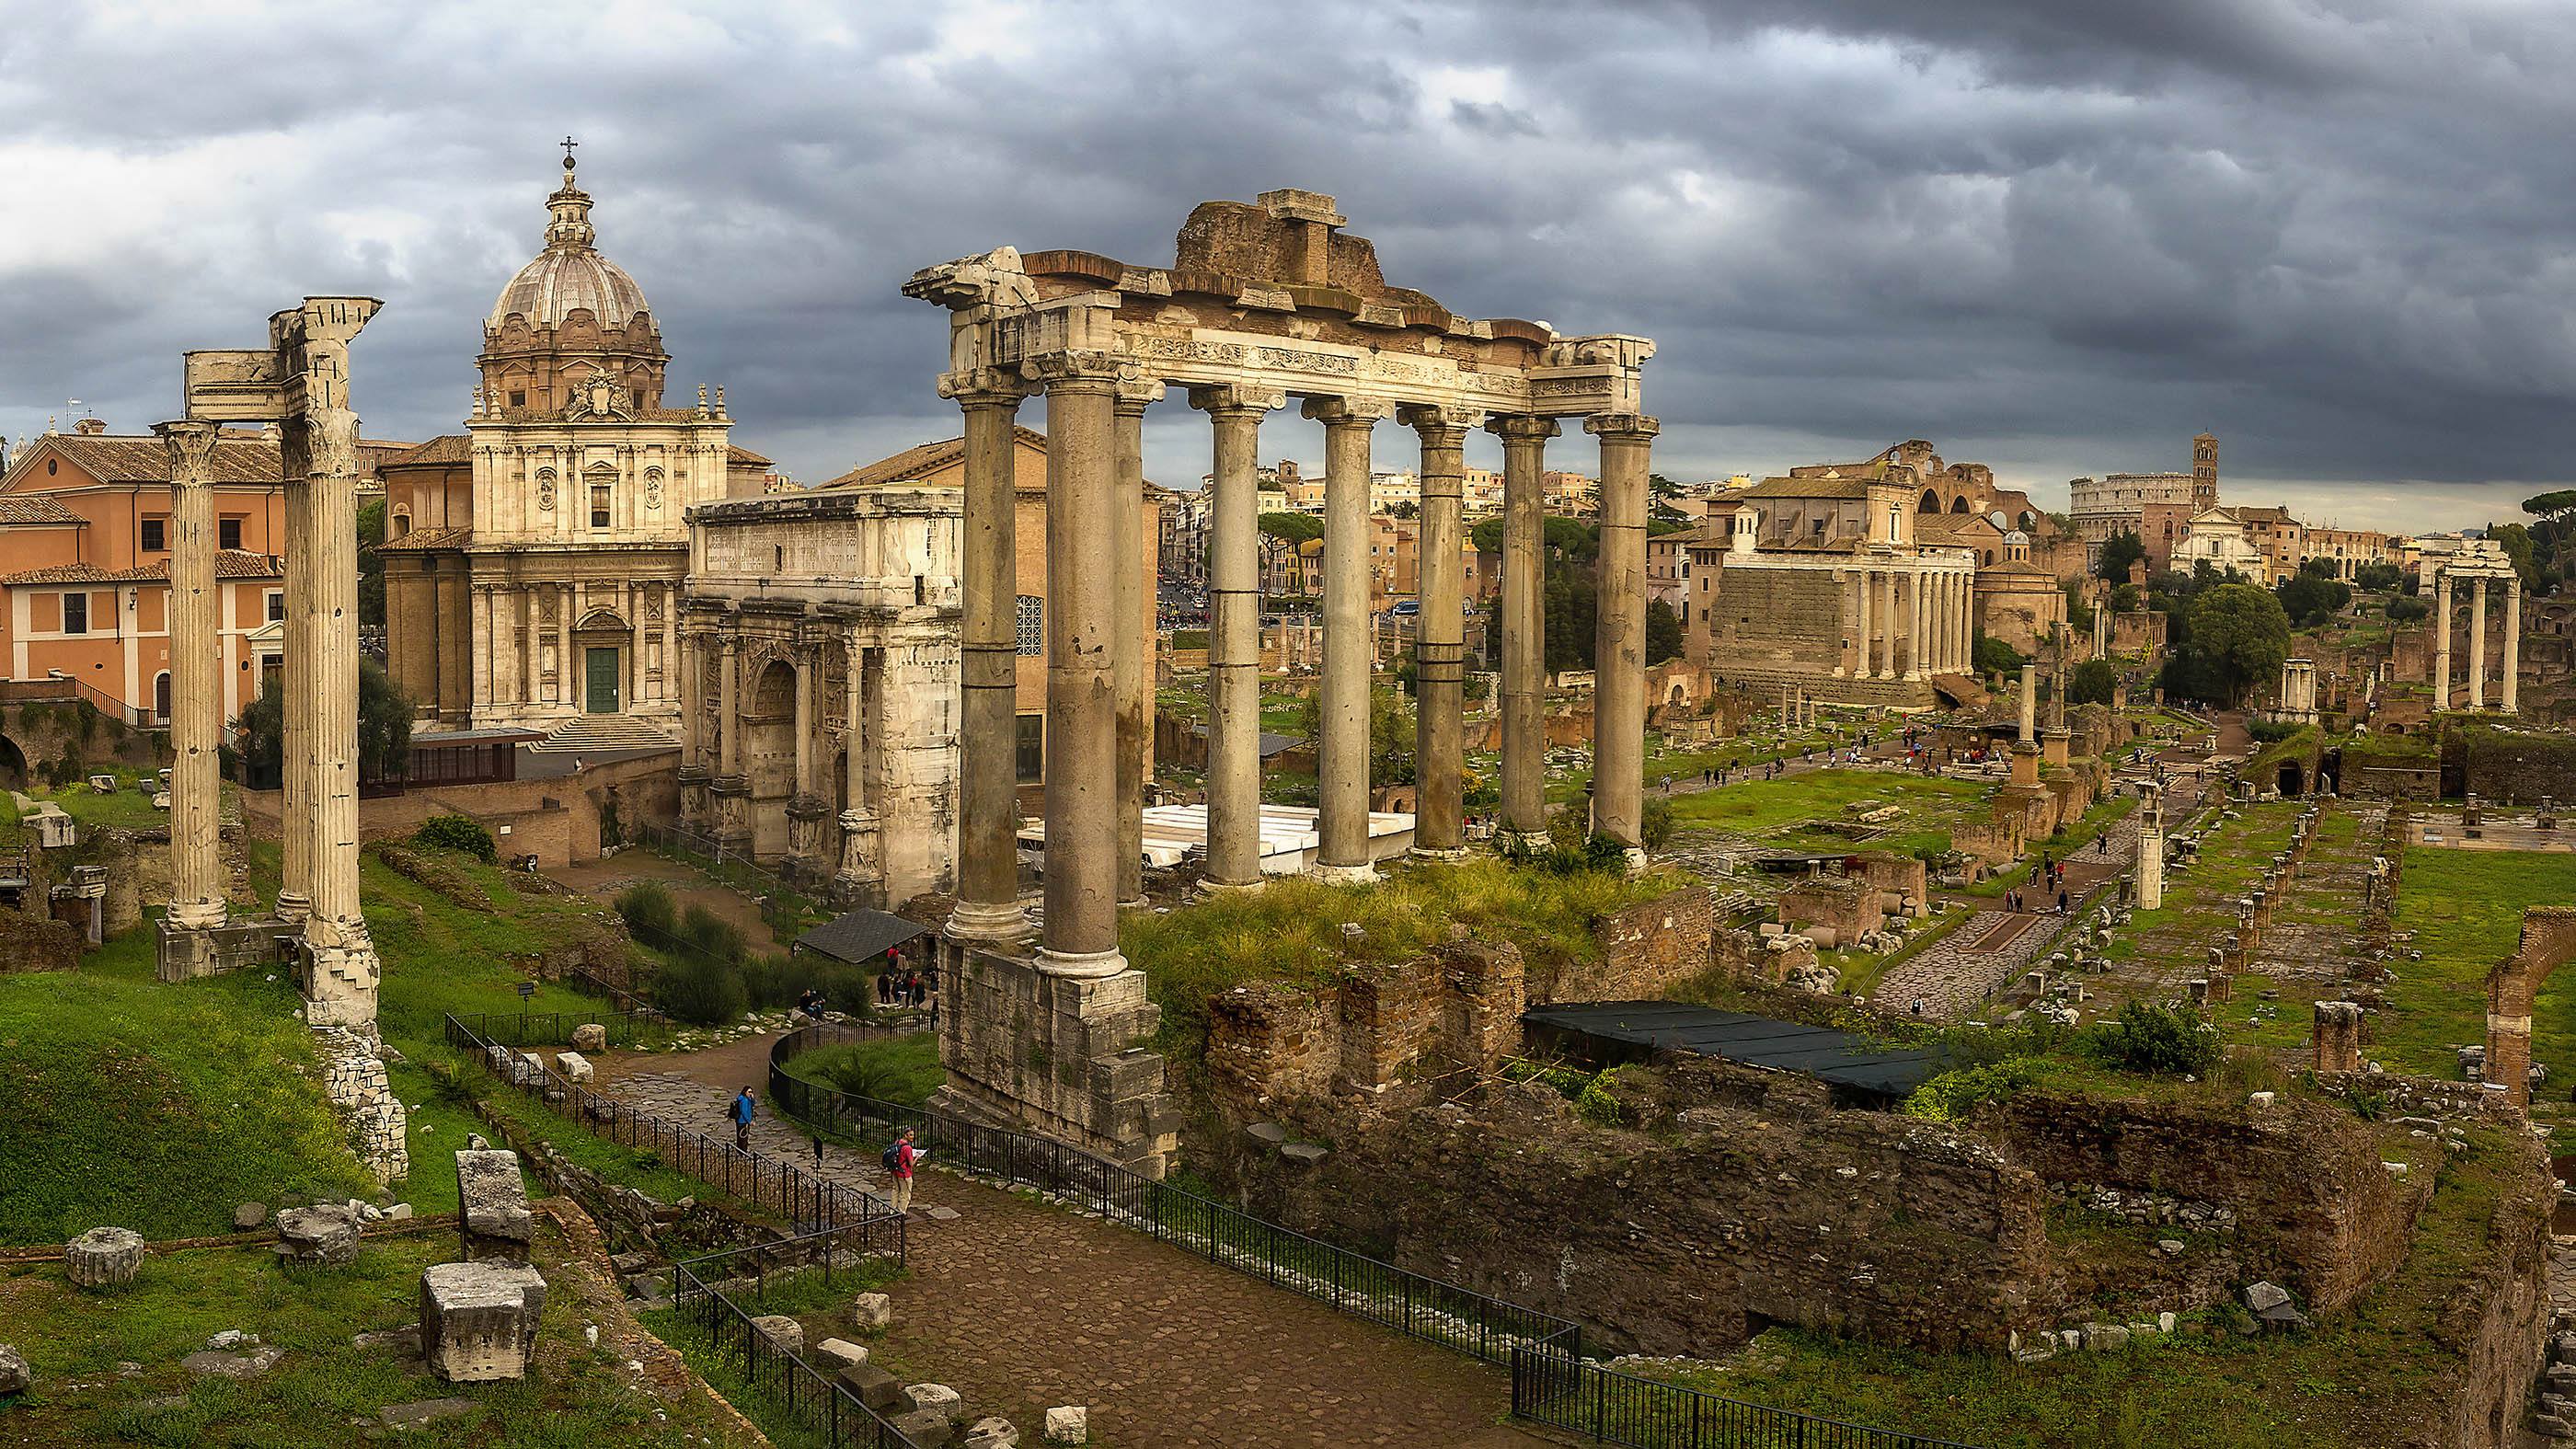 A view of the Roman Forum and the Colosseum from Capitoline Hill in Rome, Italy.